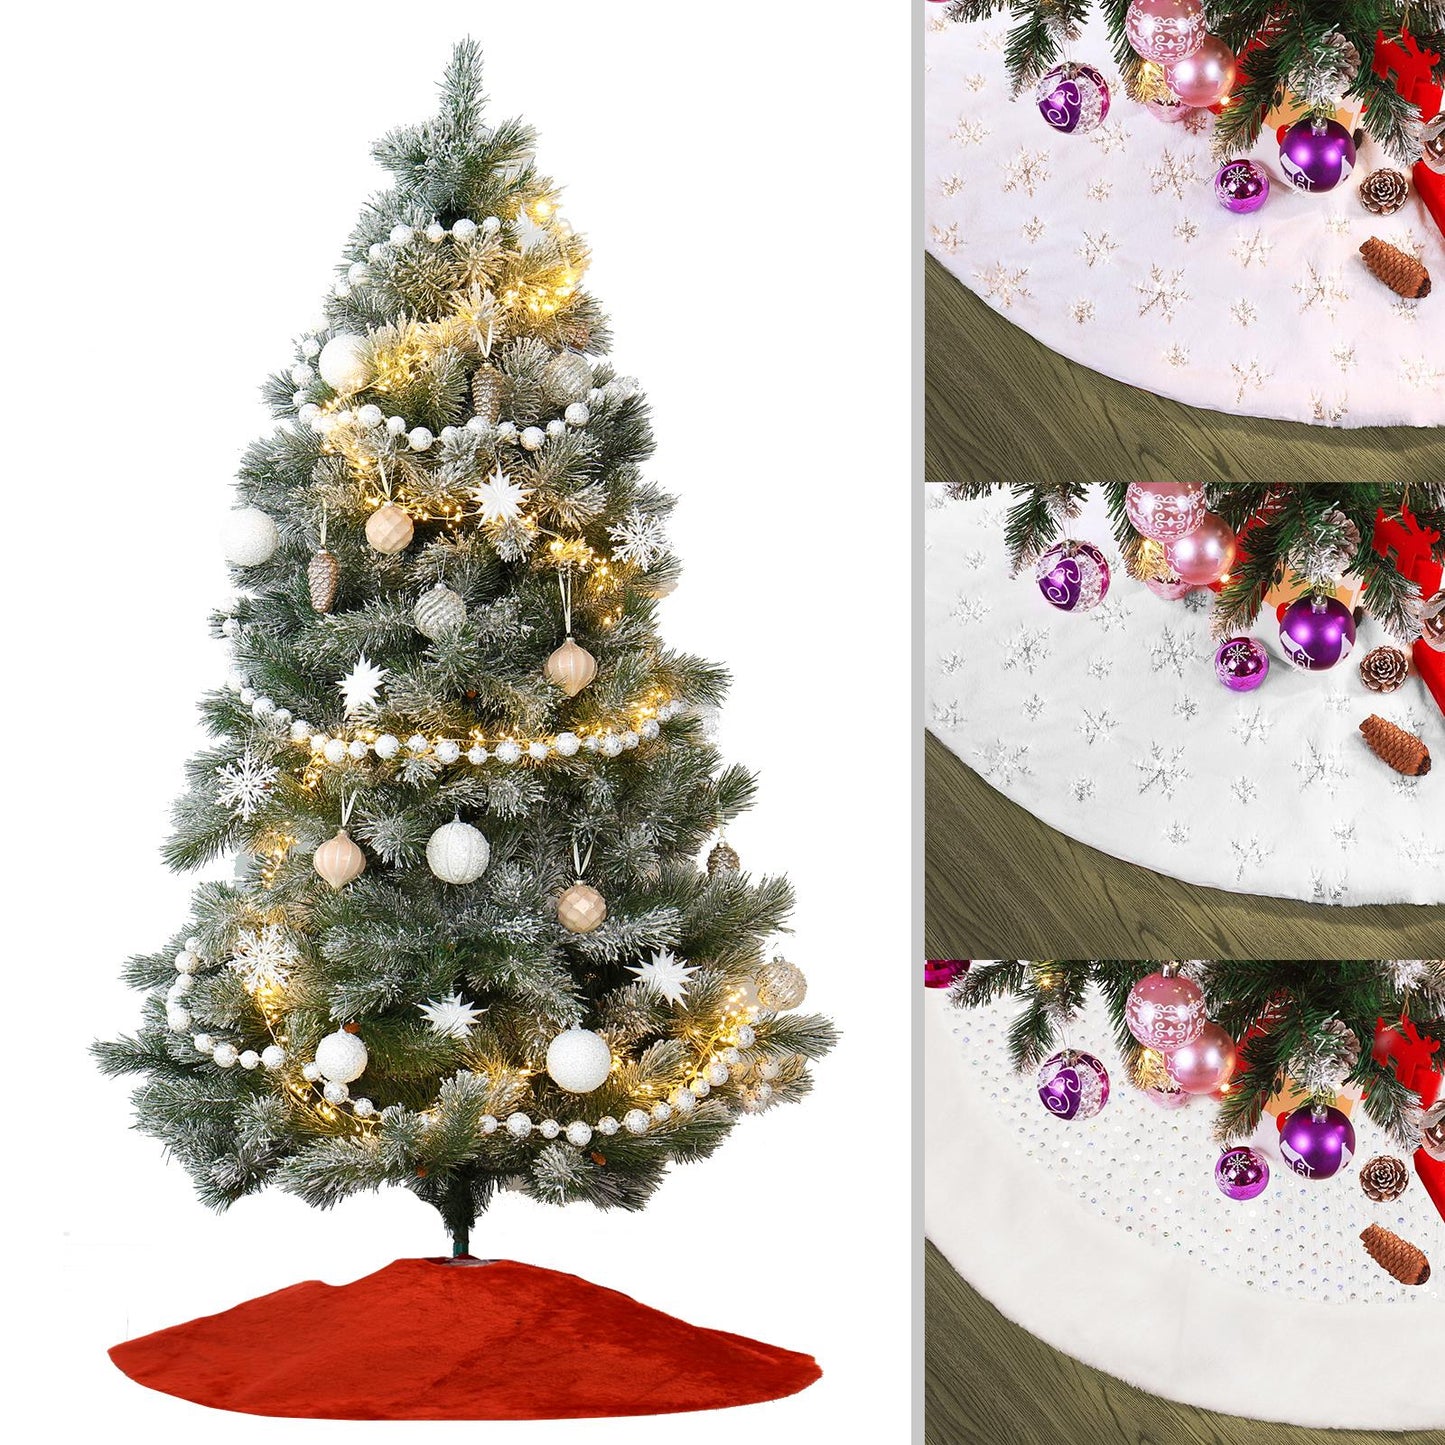 Cozy Up Your Tree with a Plush Skirt